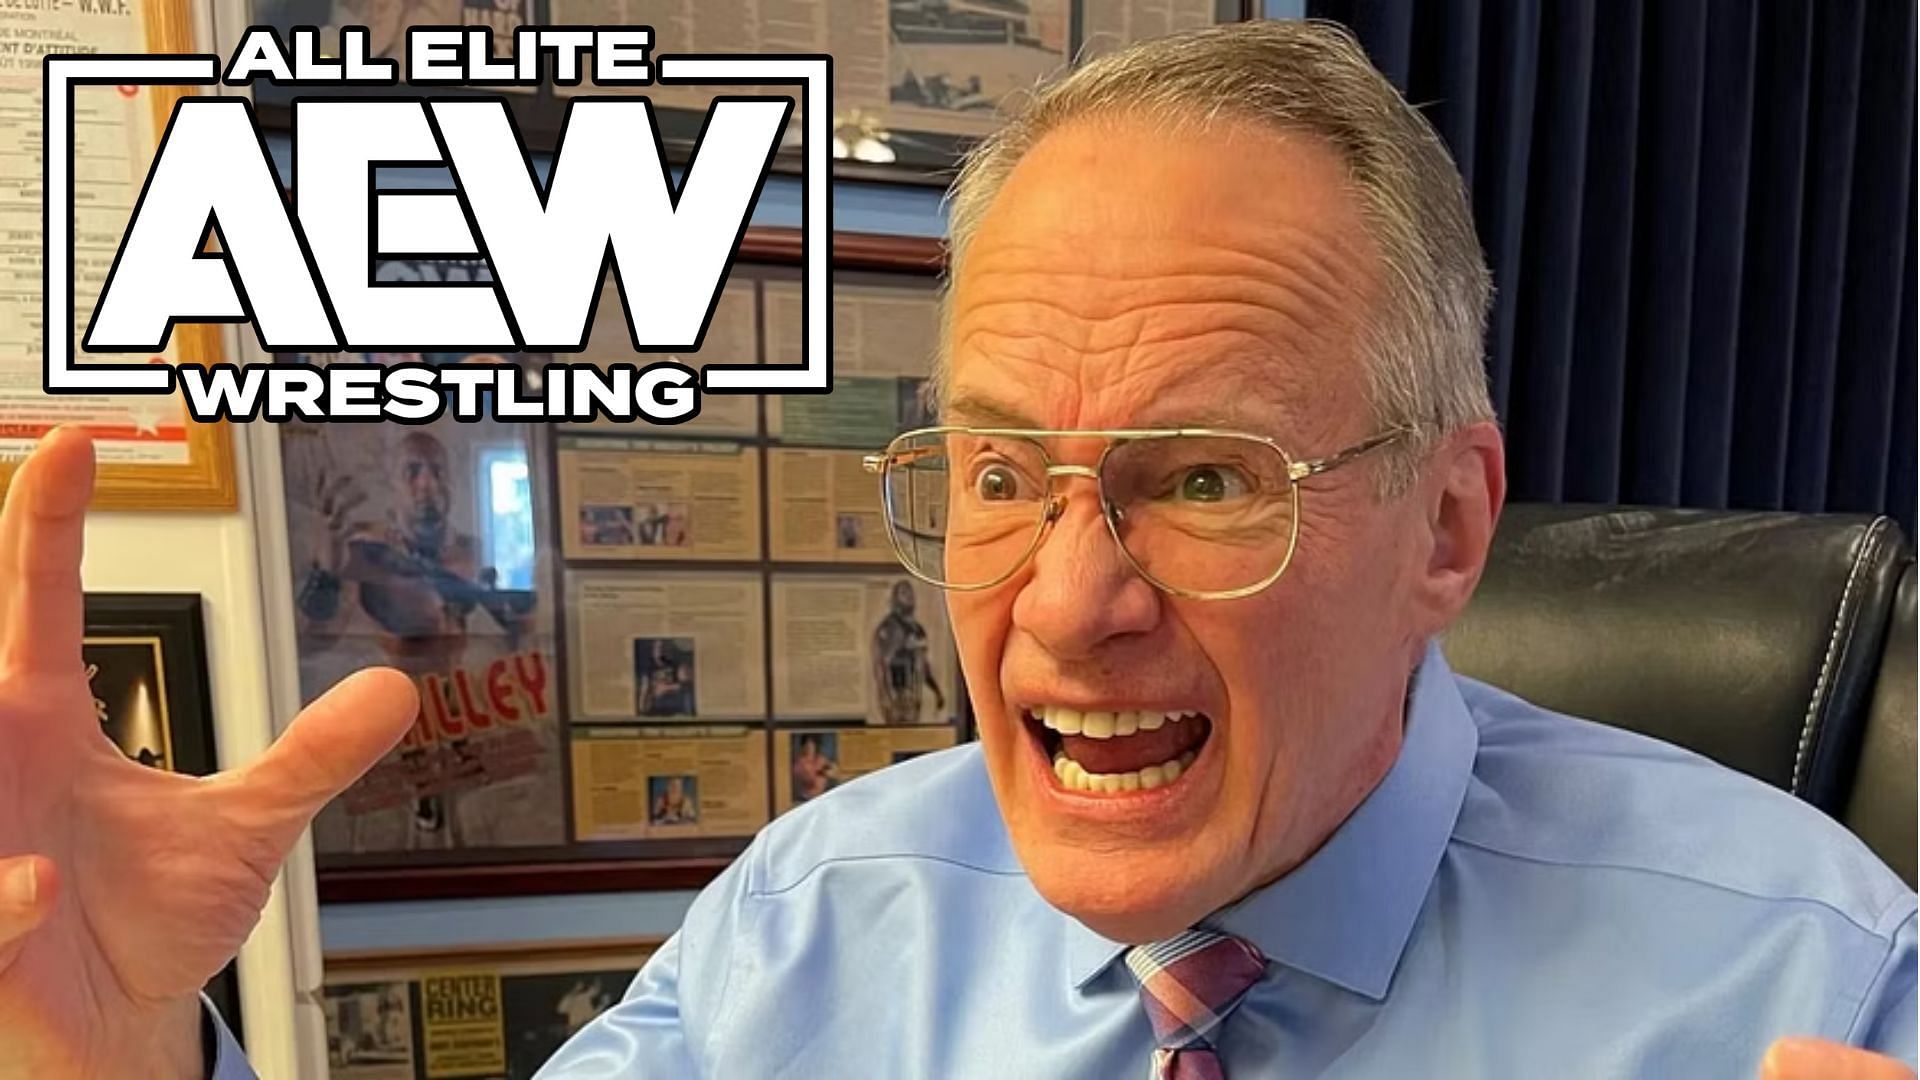 Does Jim Cornette believe this storyline will go anywhere?